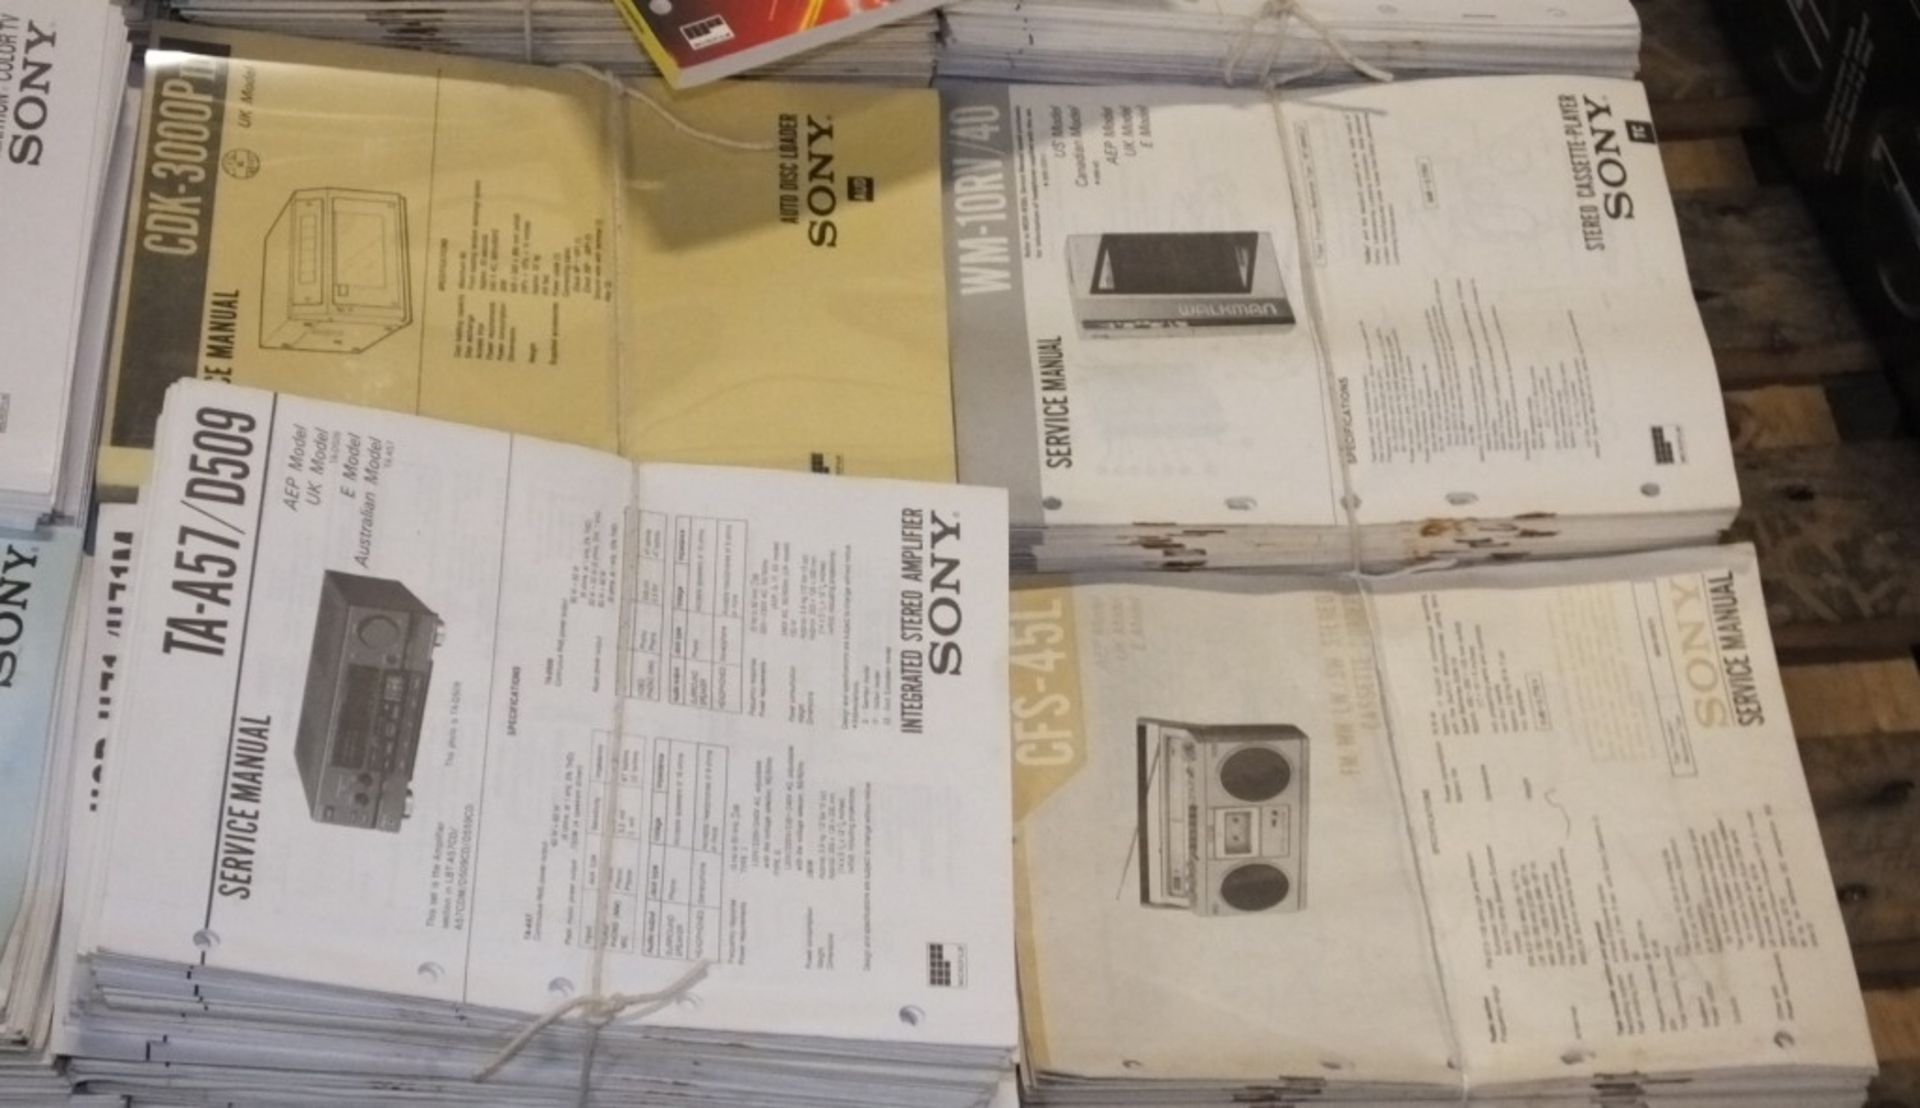 Sony Service Manuals 60s, 70s, 80s, 90s Audio Video TV Approx 2500 - Image 2 of 5